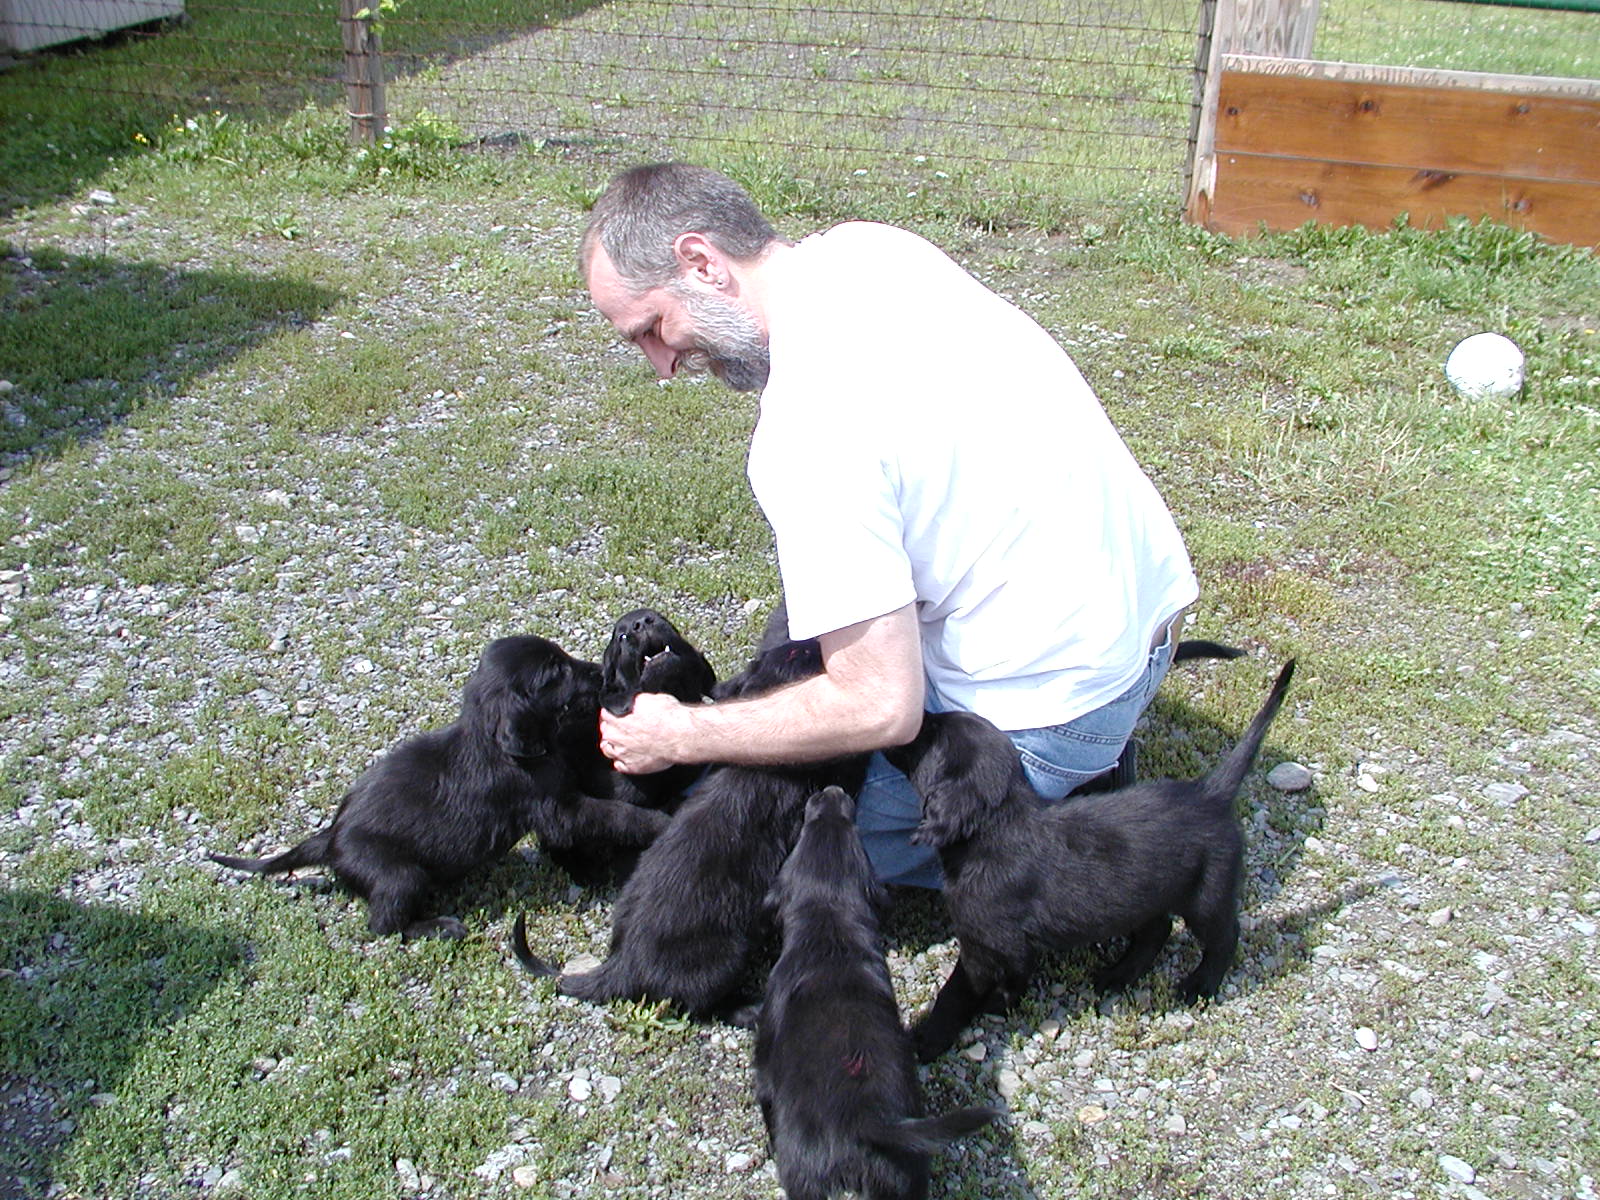 Dave with Gracie and her littermates (what joy!)